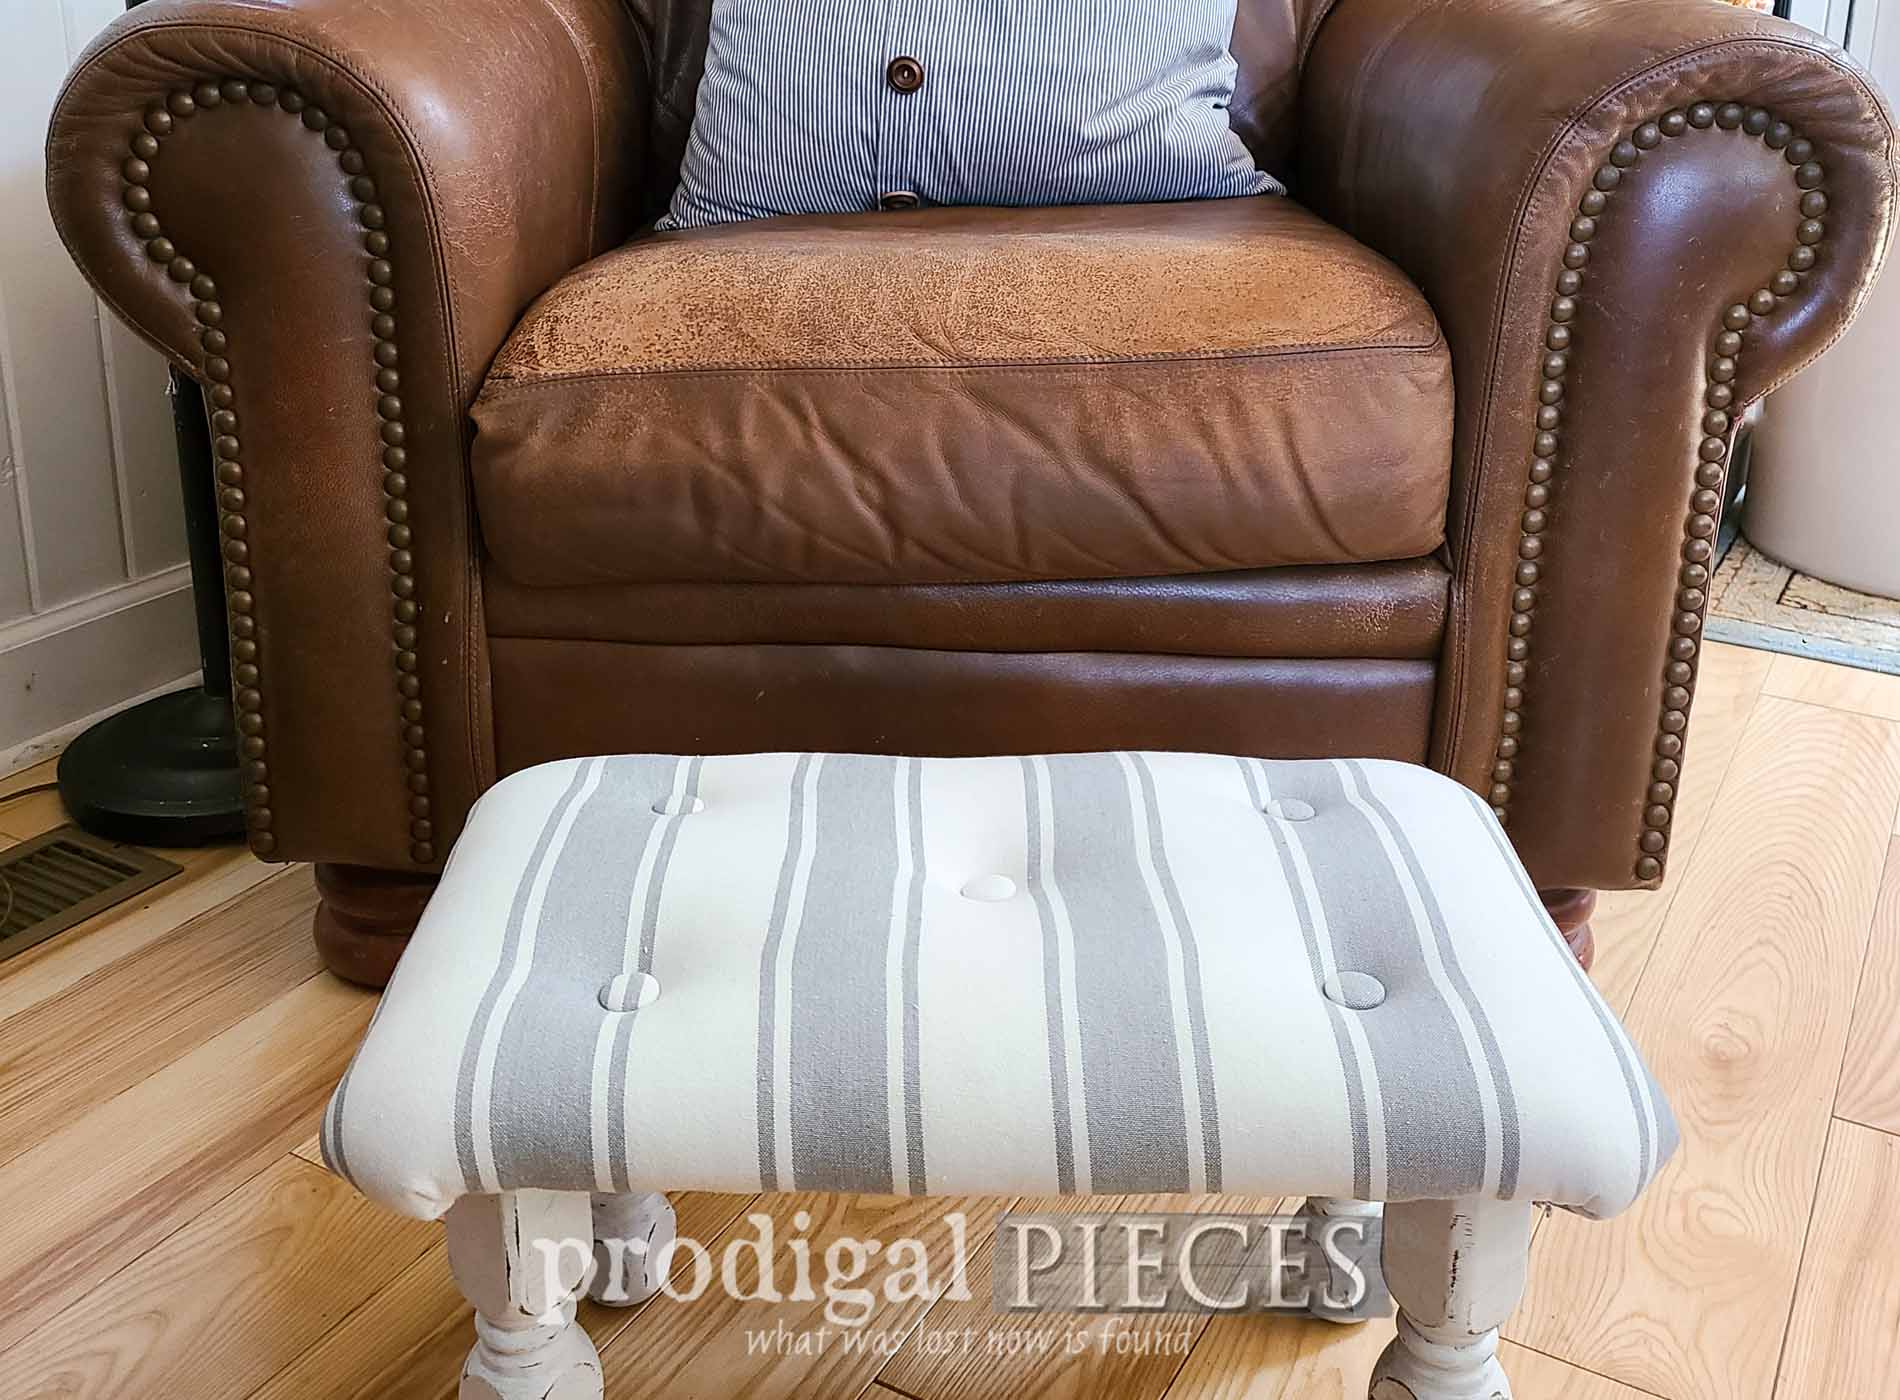 Featured Wooden Footstool Makeover DIY Tufting | prodigalpieces.com #prodigalpieces #farmhouse #furniture